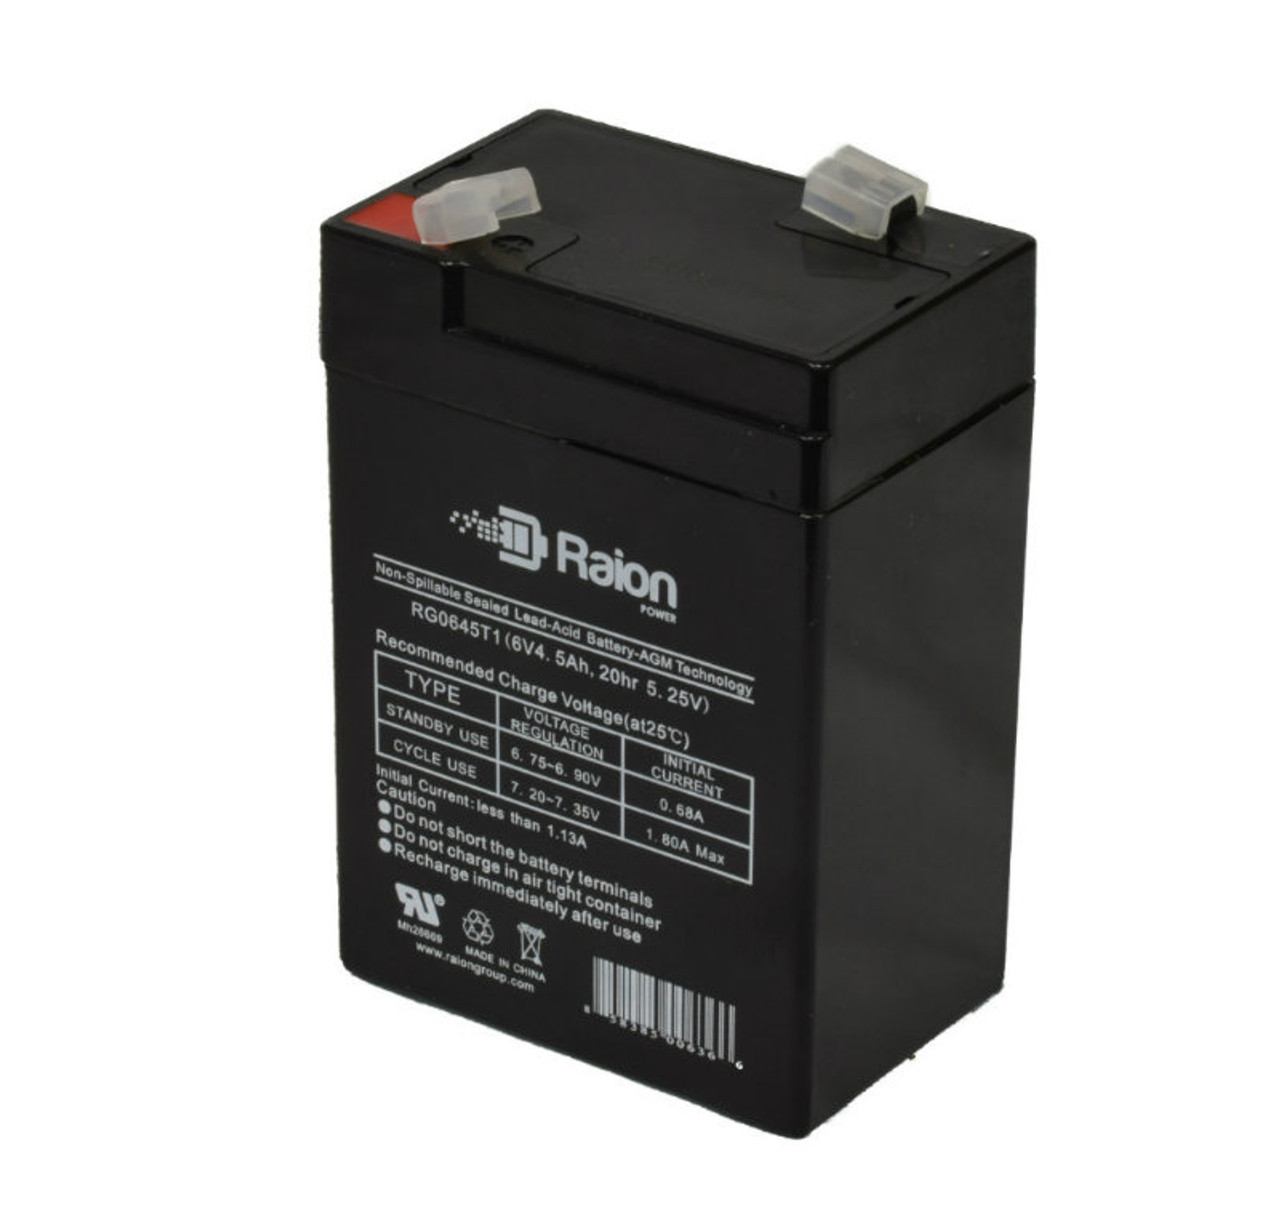 Raion Power RG0645T1 6V 4.5Ah Replacement Battery Cartridge for Kalee Warrior KL30040 Motorcycle